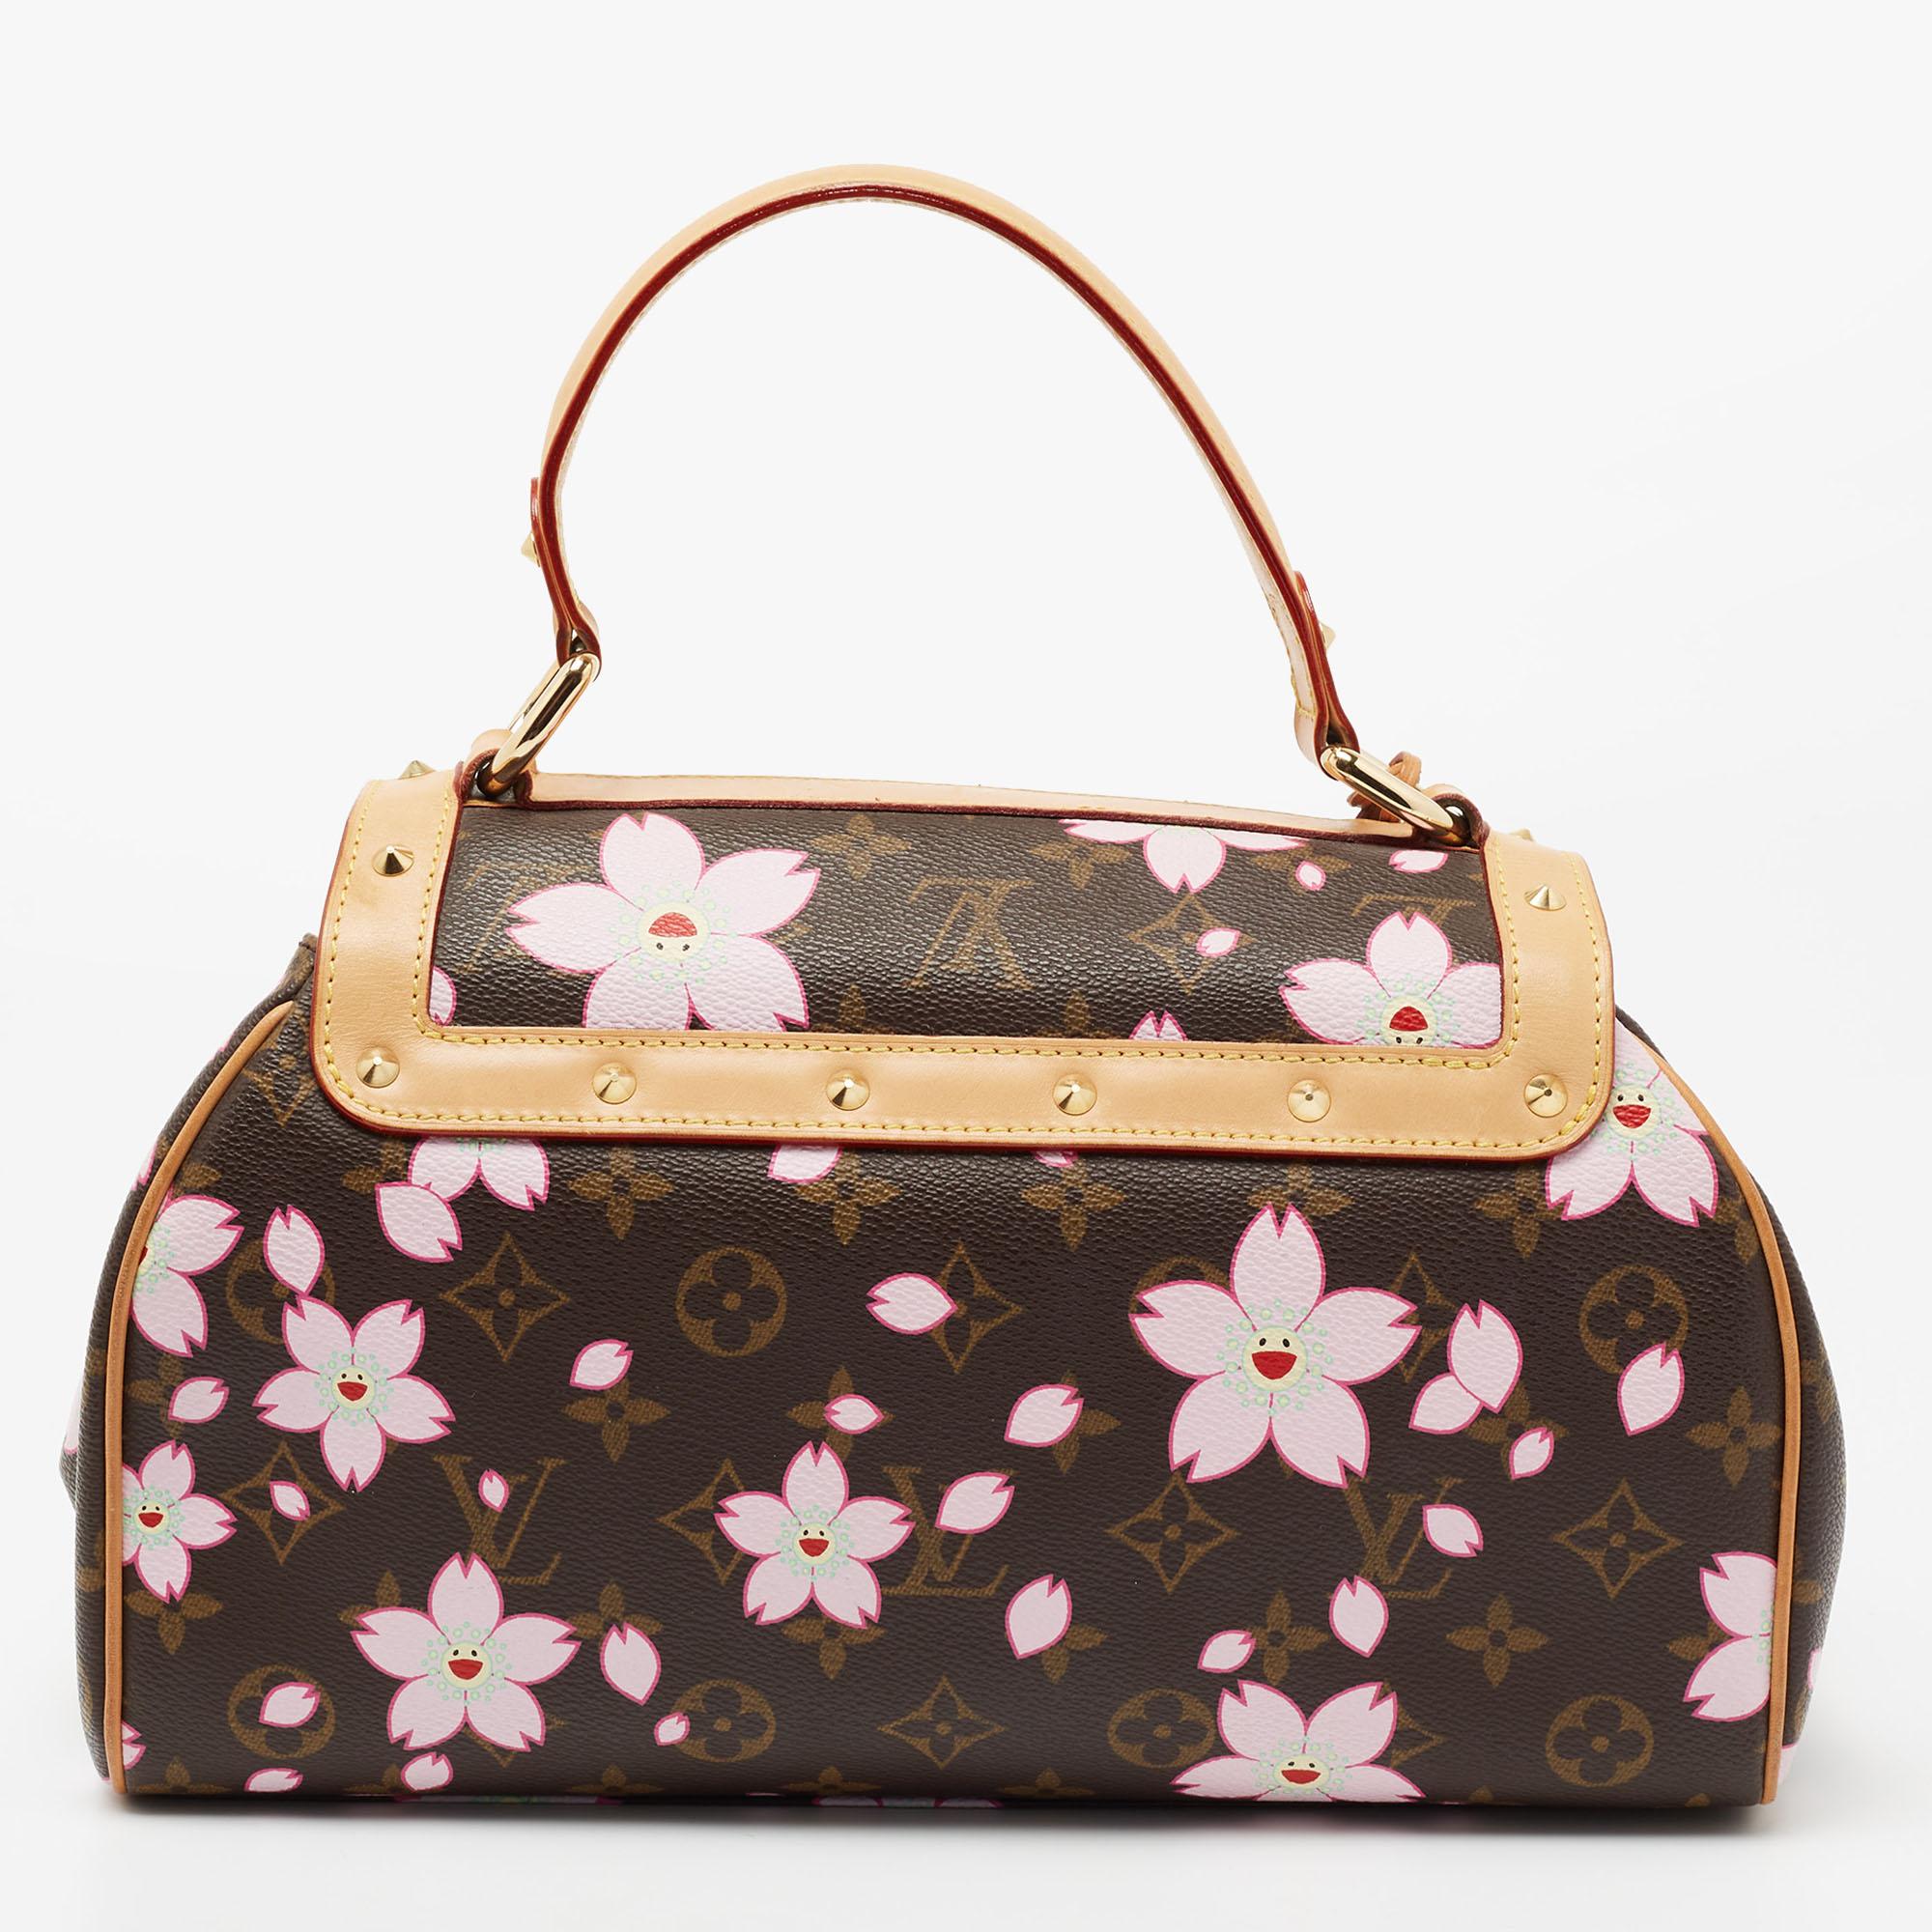 This limited edition Louis Vuitton Sac Retro bag was introduced in the Spring/Summer 2003 collection. The signature Monogram canvas got a cheerful update with the cherry blossoms designed by none other than Takashi Murakami. The bag is adorned with